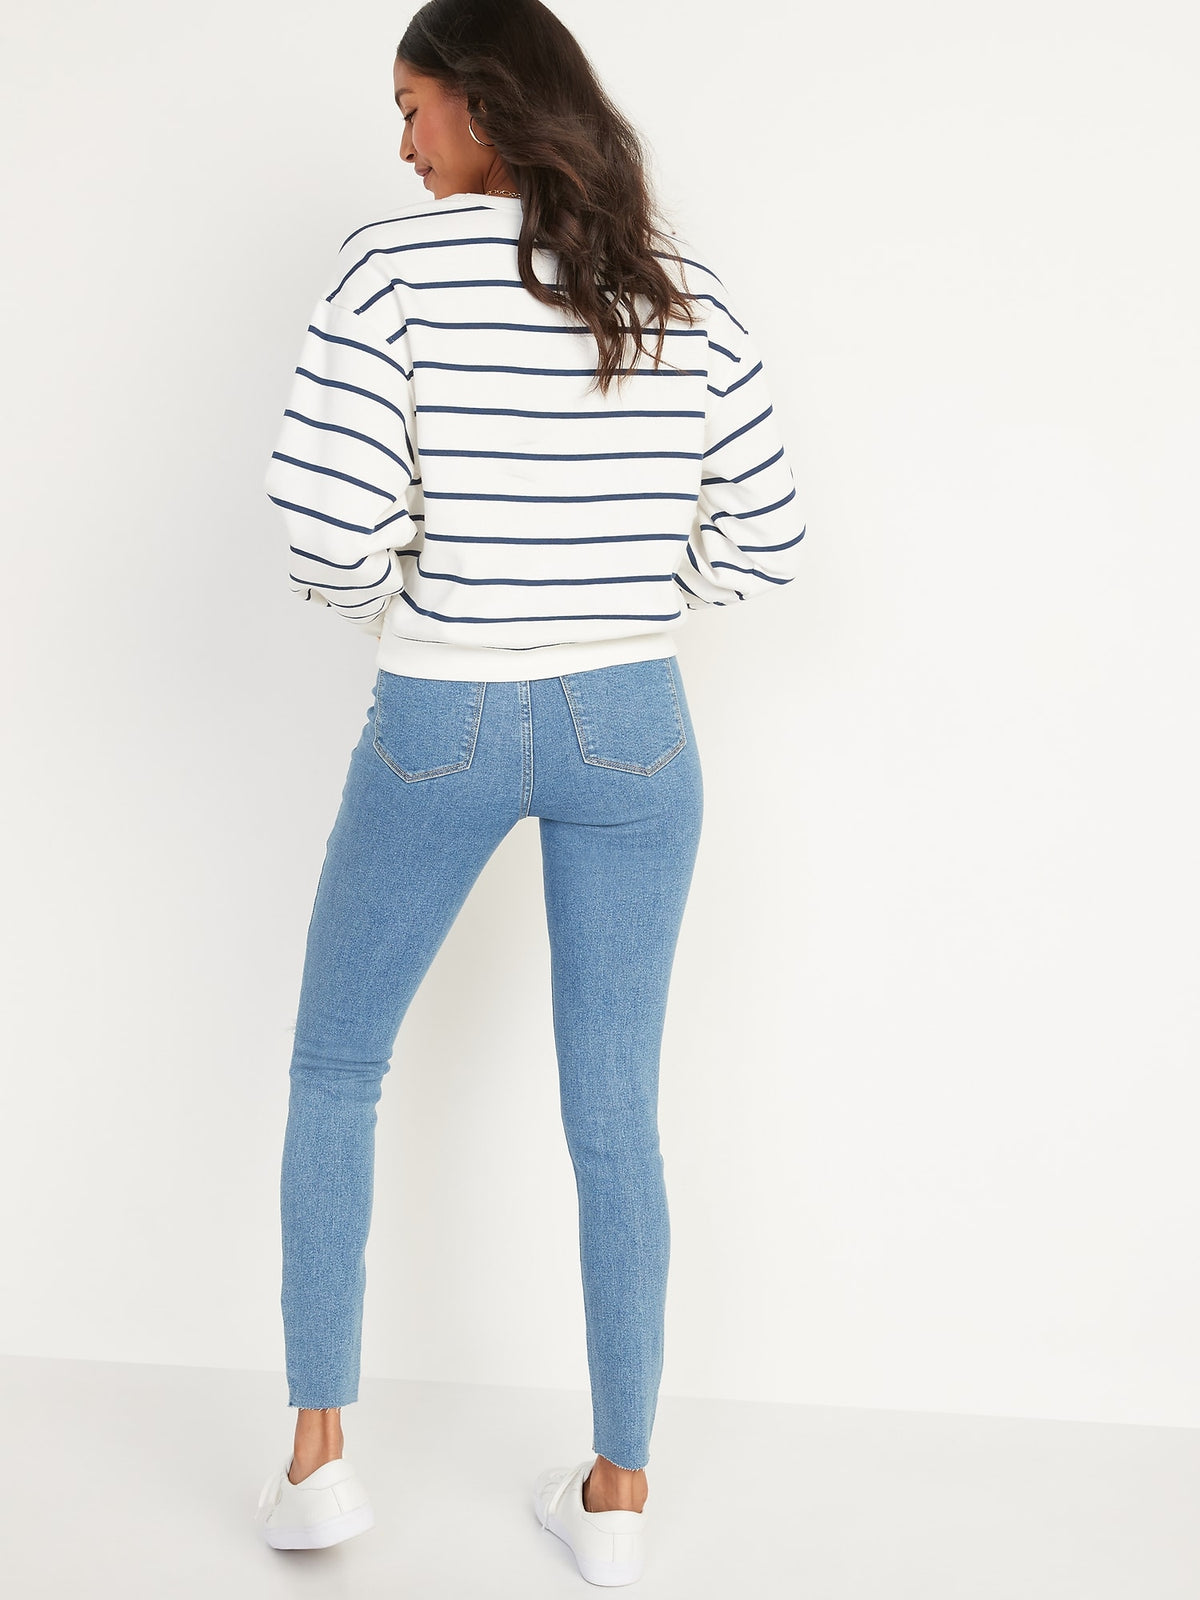 Old Navy High-Waisted Rockstar Super Skinny Ripped Jeans for Women